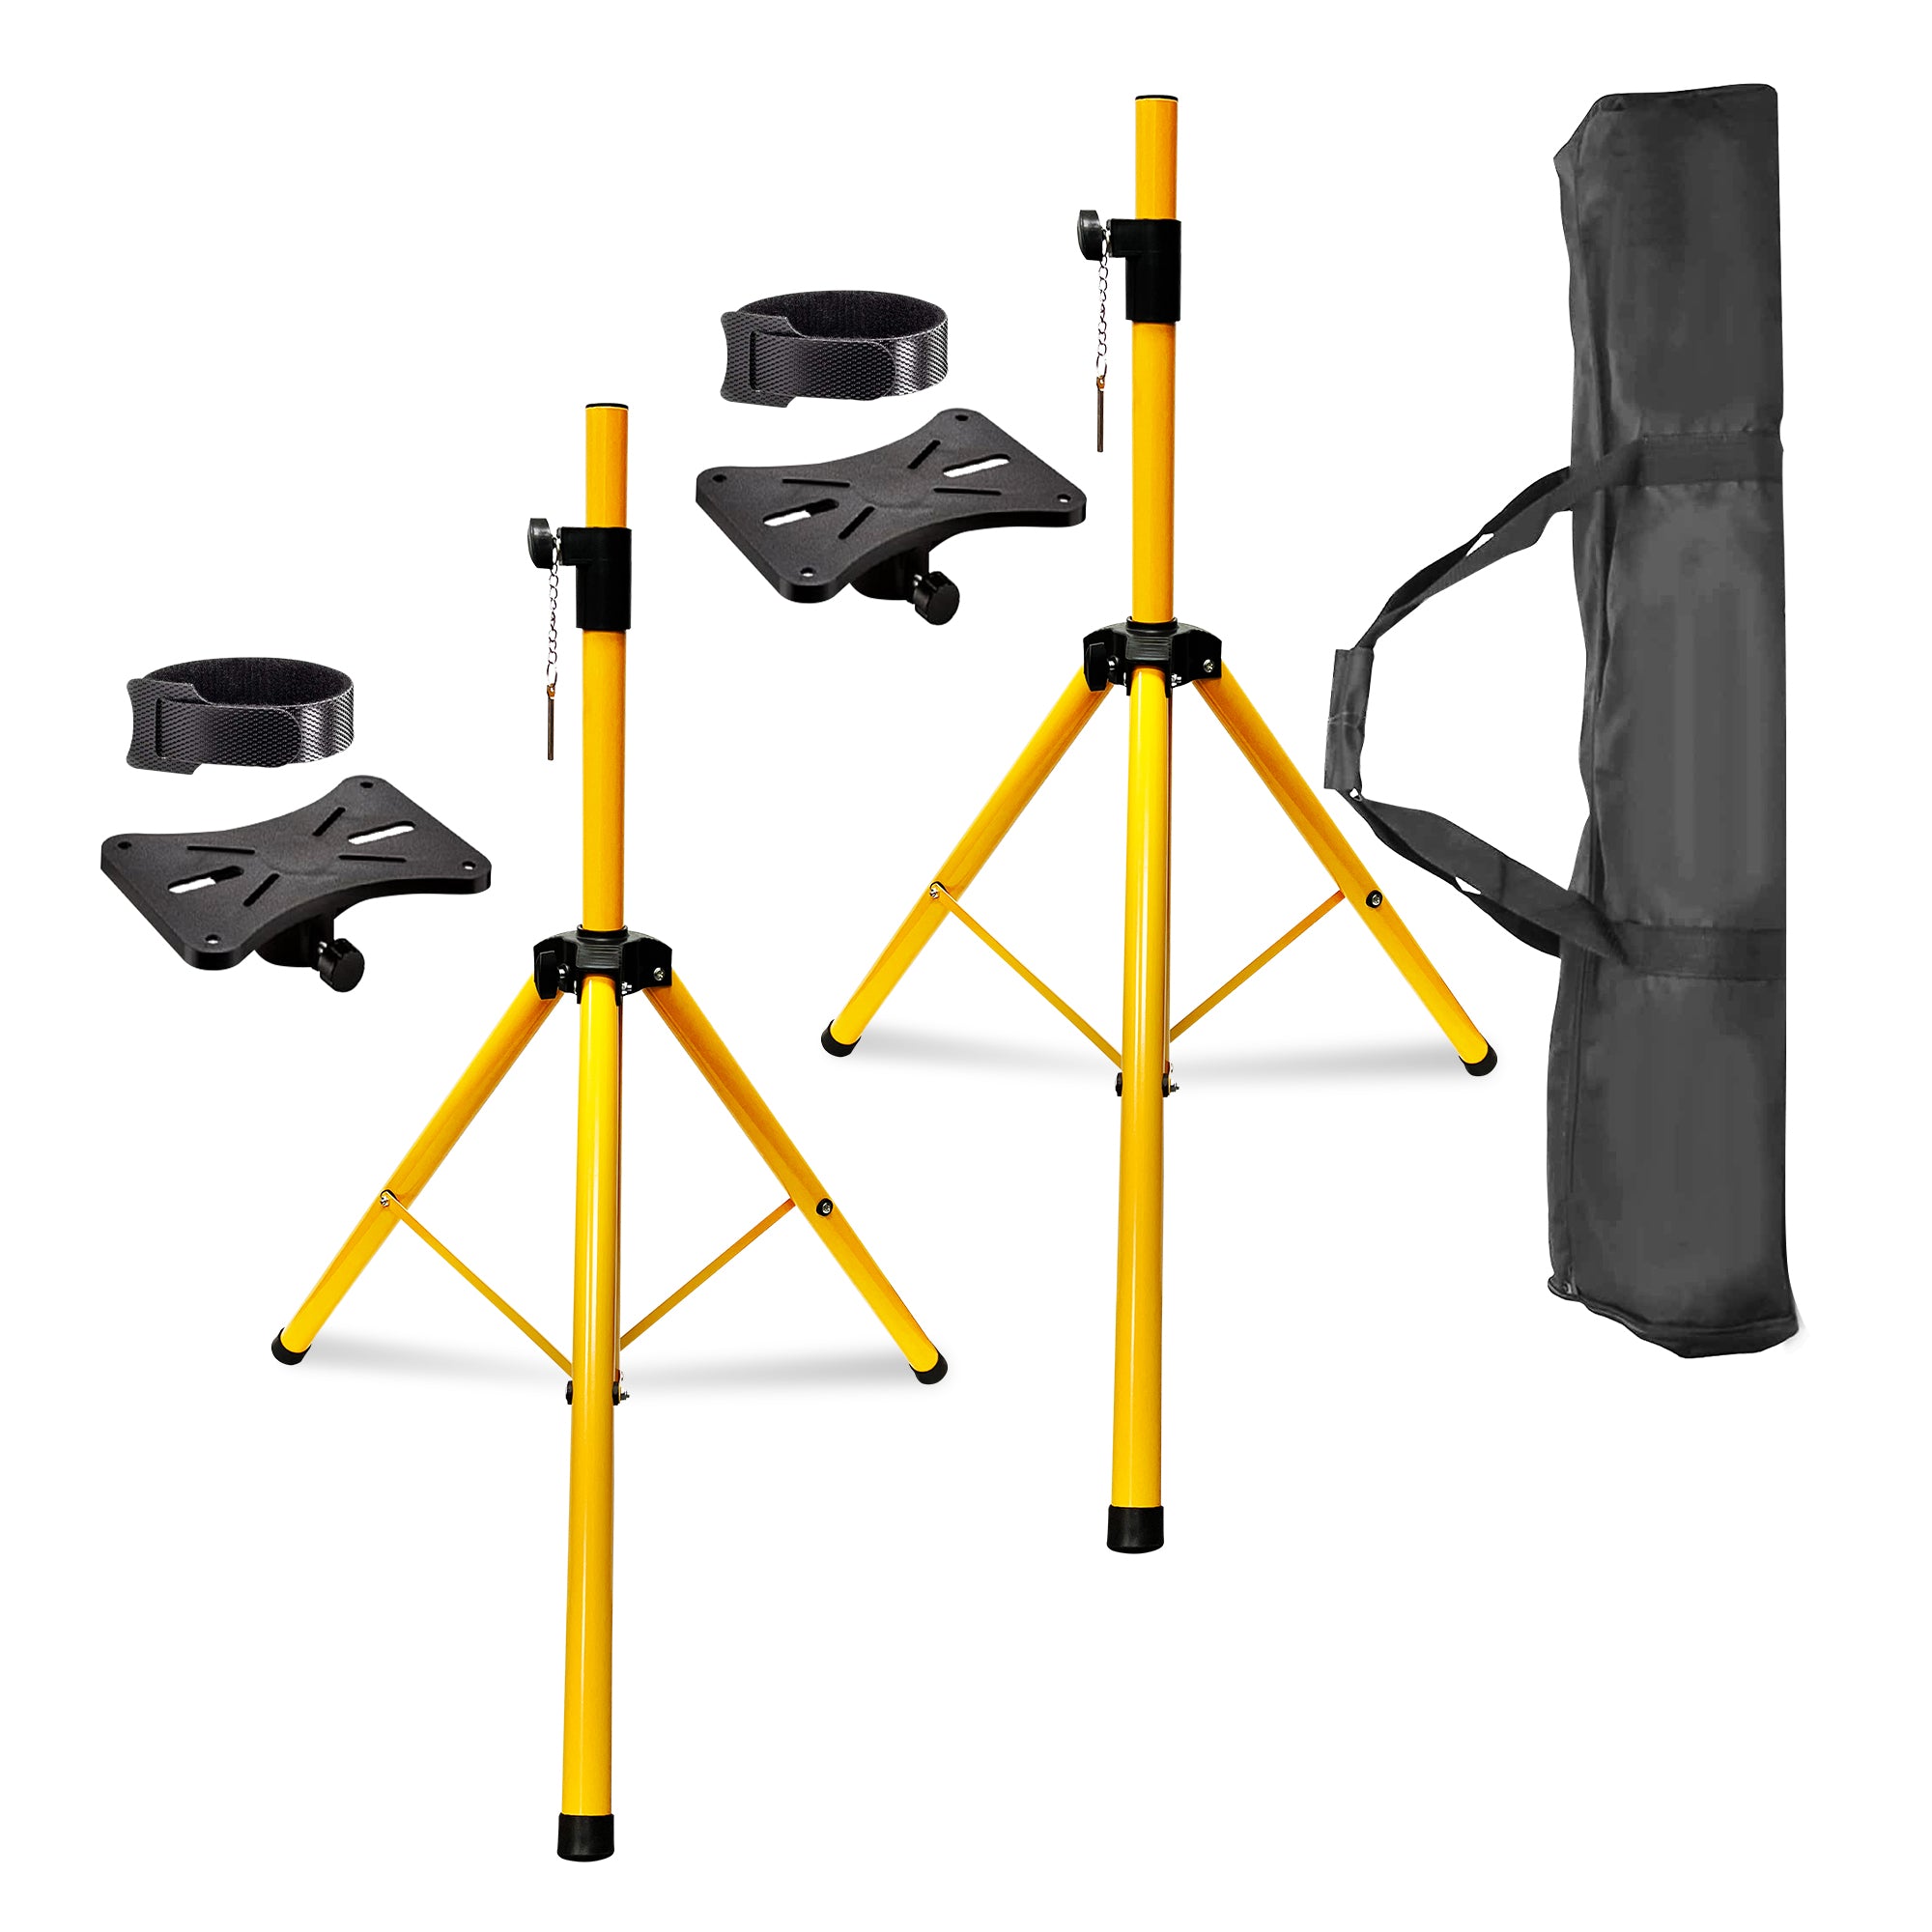 5Core Speaker Stands Tripod Tall DJ Studio Monitor stands 72" Pole Mount Yellow with Bag